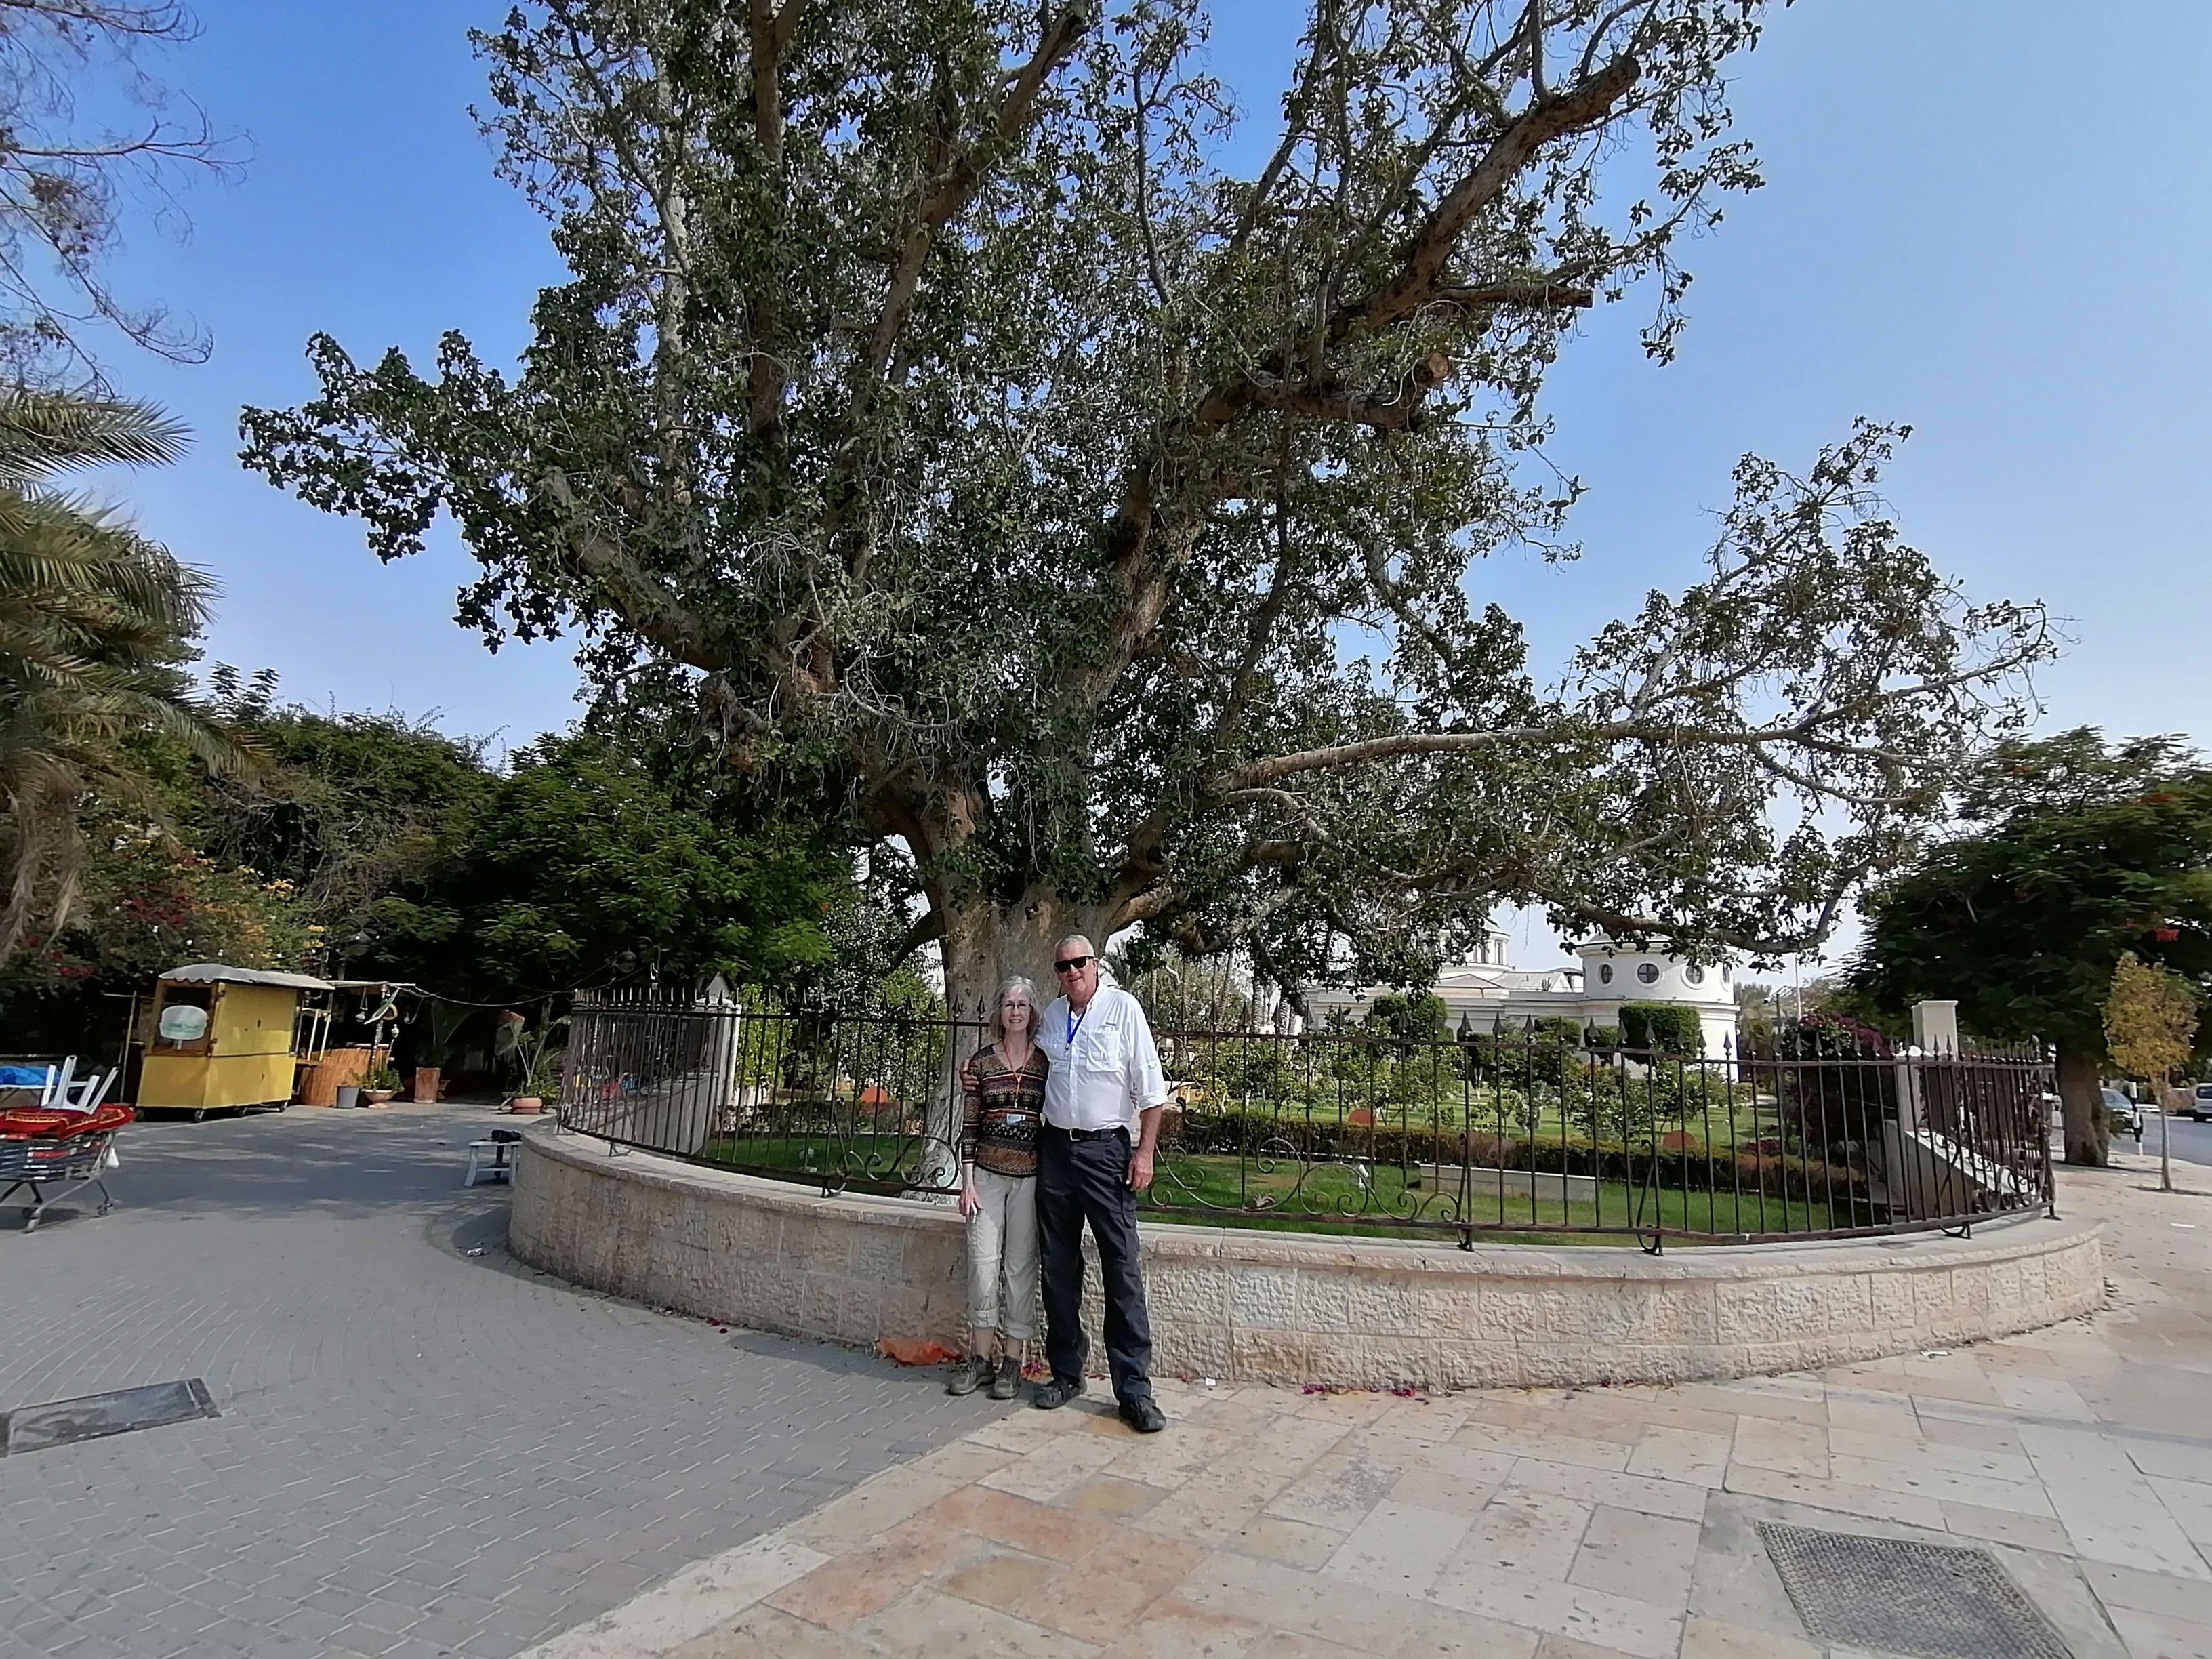 Bible Sycamore Tree in Jericho Israel Trip - Tour from Jerusalem and Tel Aviv